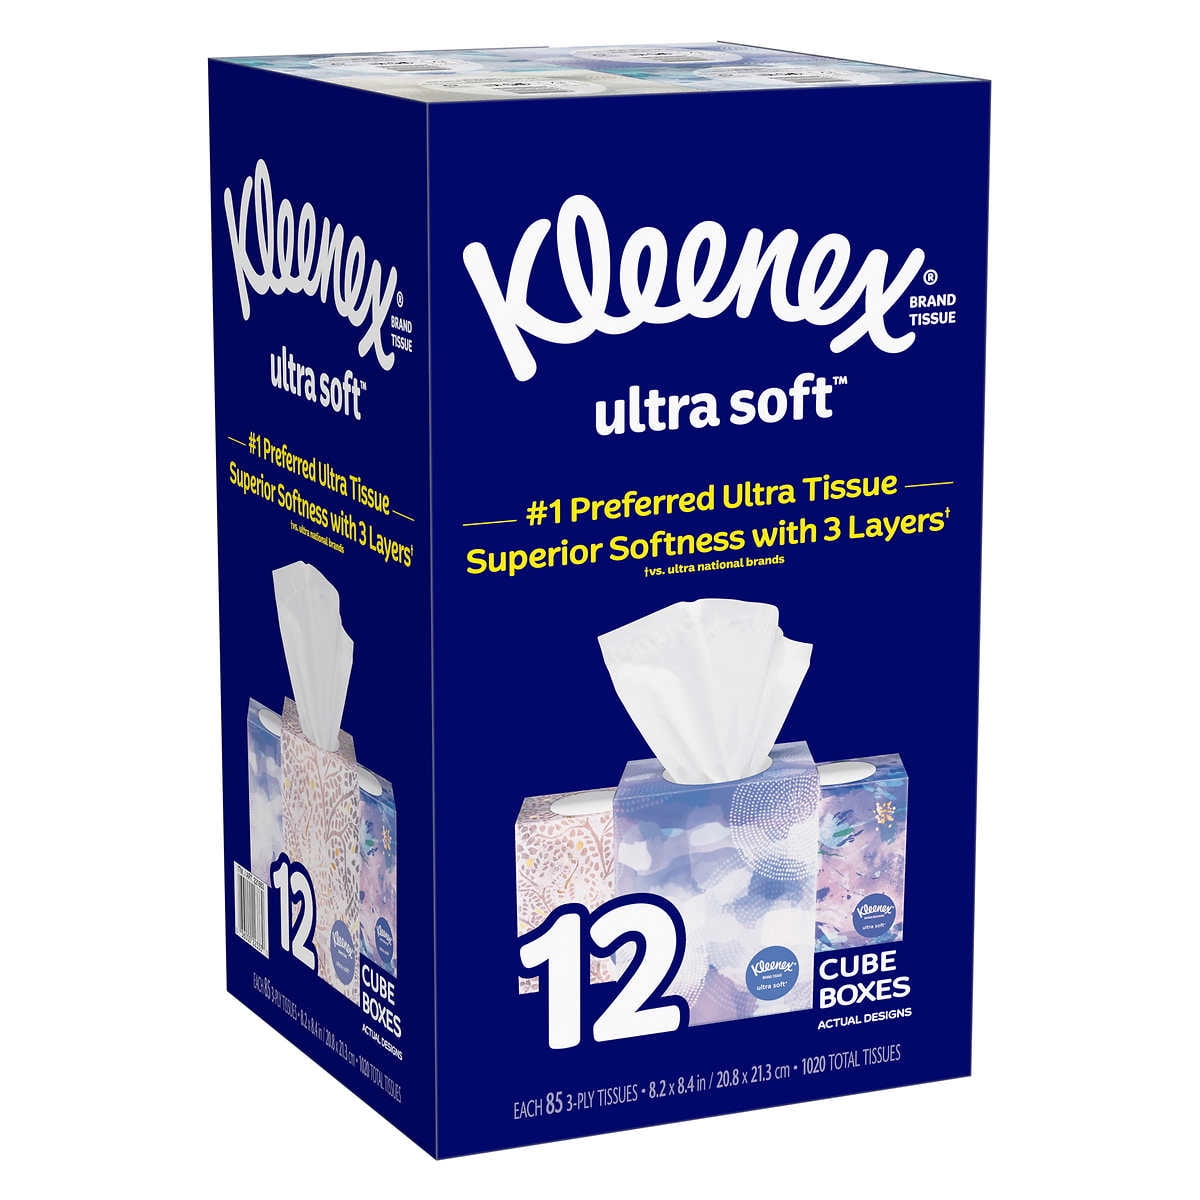 Cube Upright 50 count 2-Ply Deal Kleenex Ultra-Soft Facial Tissues 